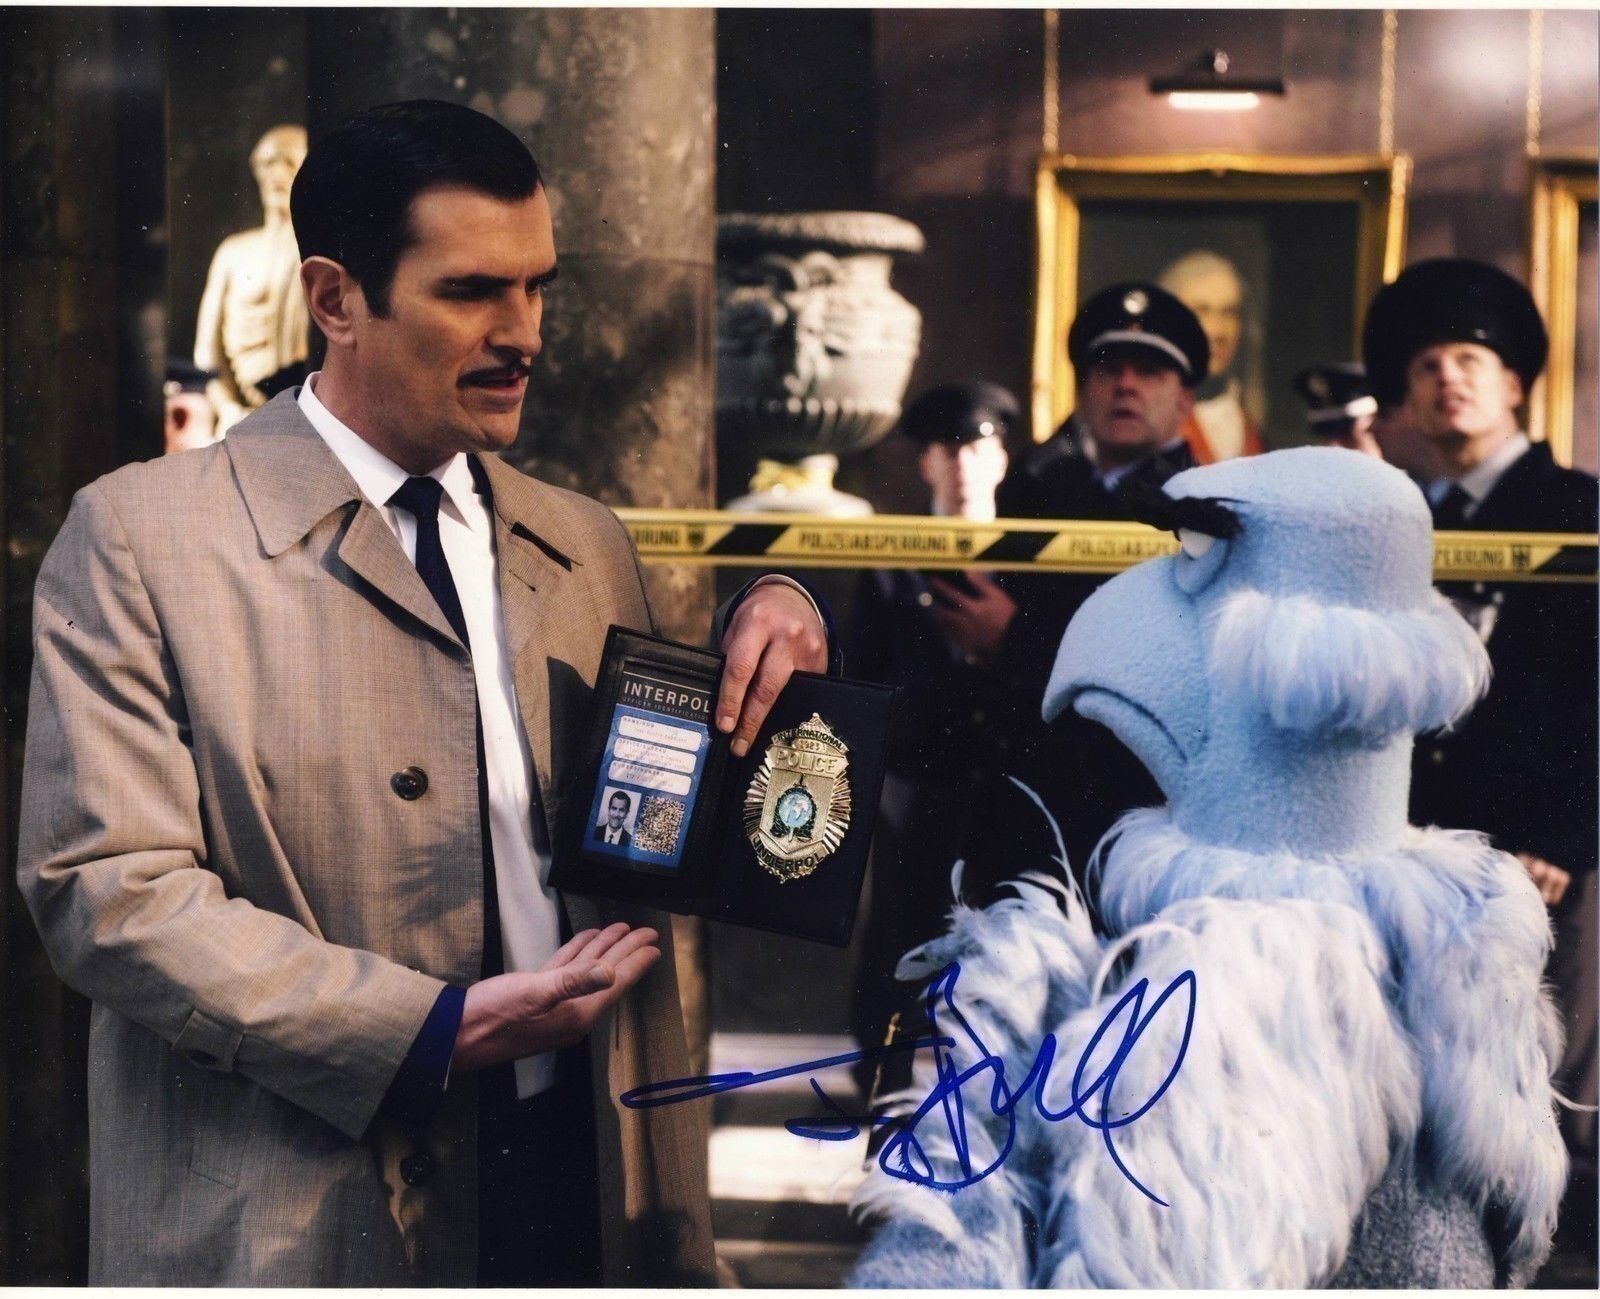 Ty Burrell Autograph MUPPETS MOST WANTED Signed 8x10 Photo [6030]